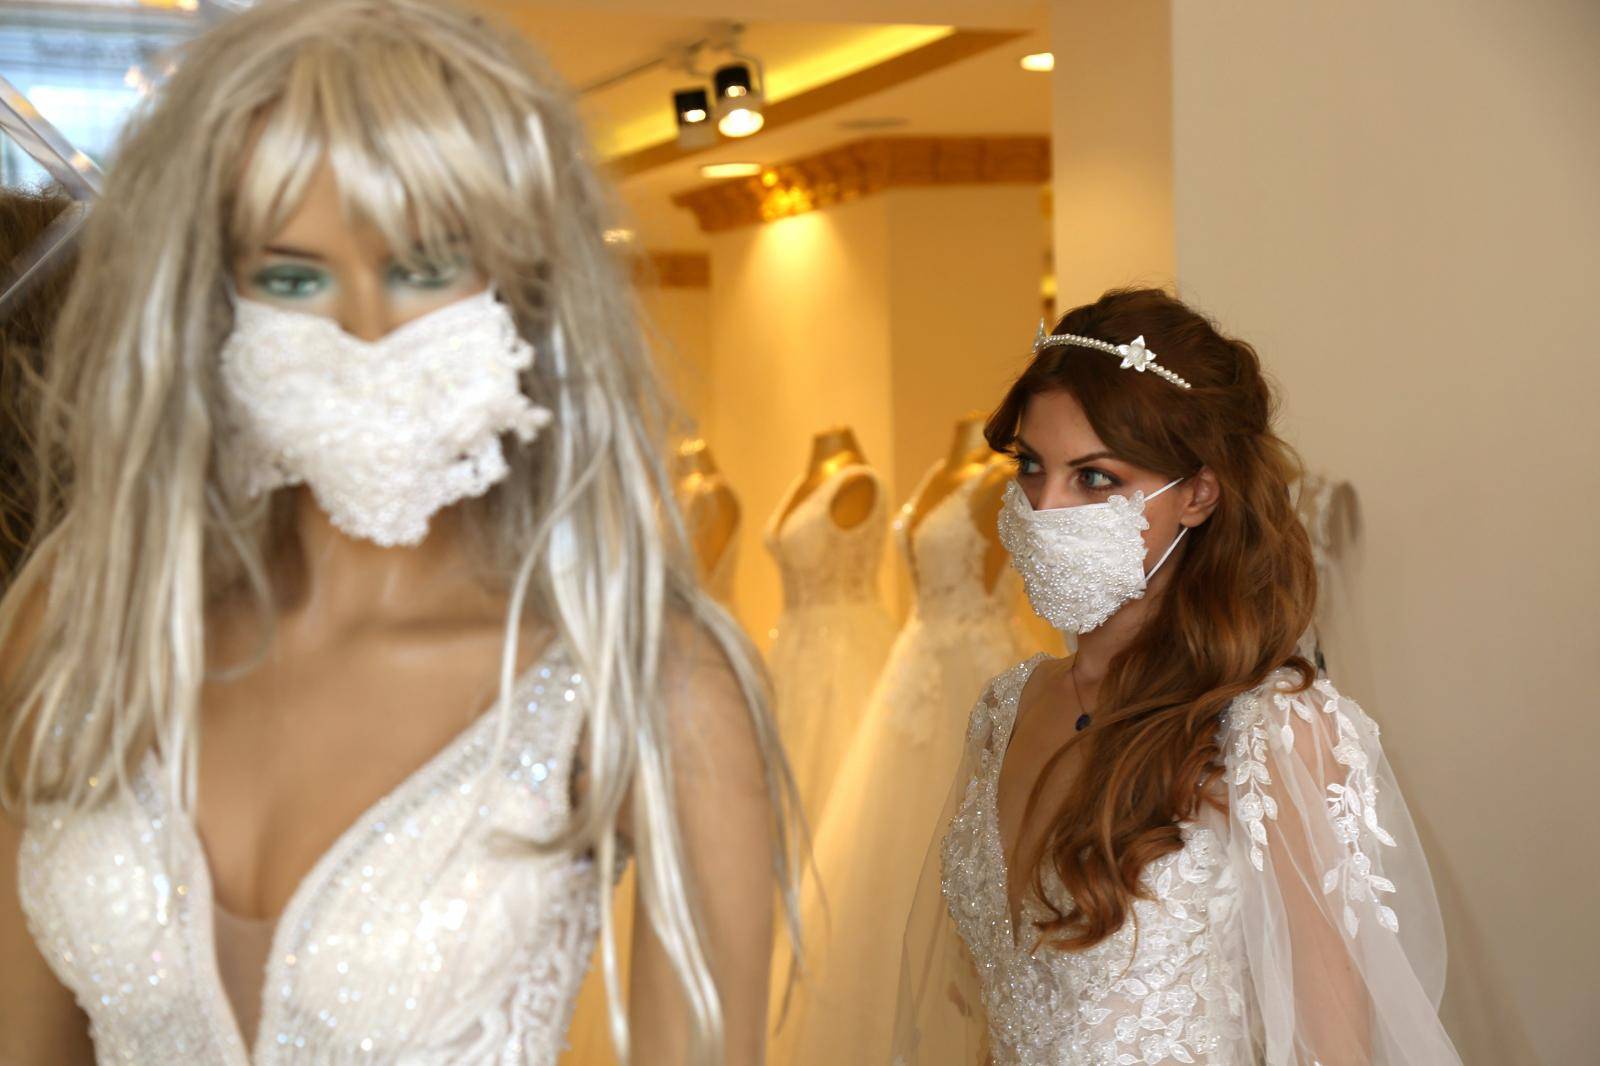 An employee presents a wedding dress with a mask at the Mezopotamya bridal gowns shop in Diyarbakir